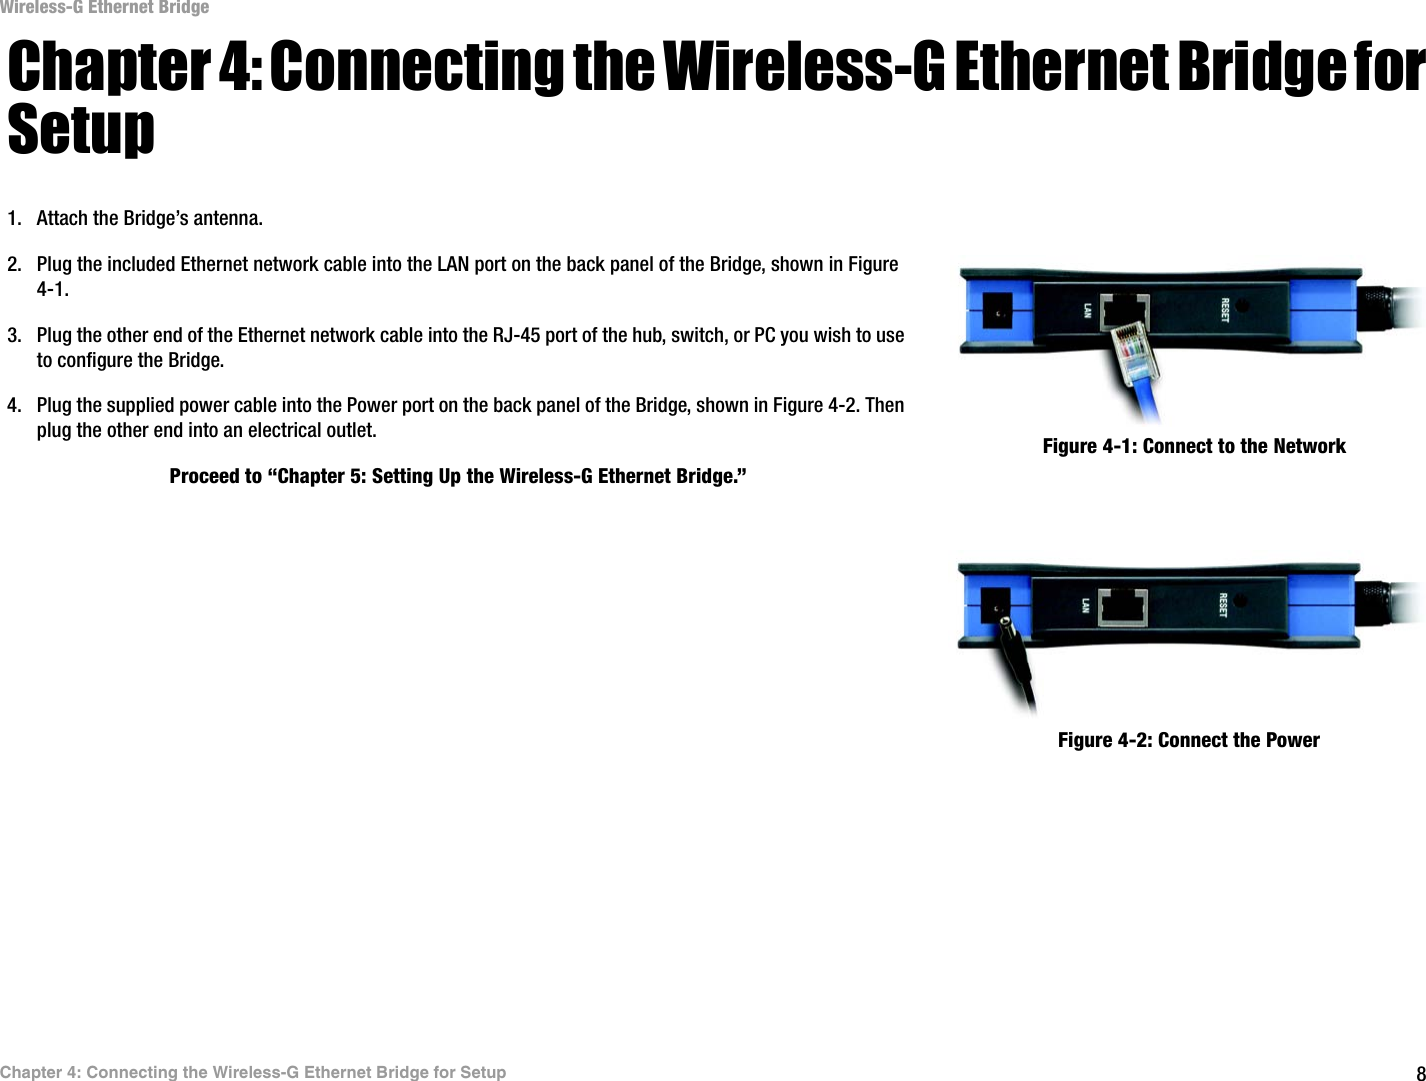 8Chapter 4: Connecting the Wireless-G Ethernet Bridge for SetupWireless-G Ethernet BridgeChapter 4: Connecting the Wireless-G Ethernet Bridge for Setup1. Attach the Bridge’s antenna.2. Plug the included Ethernet network cable into the LAN port on the back panel of the Bridge, shown in Figure 4-1.3. Plug the other end of the Ethernet network cable into the RJ-45 port of the hub, switch, or PC you wish to use to configure the Bridge.4. Plug the supplied power cable into the Power port on the back panel of the Bridge, shown in Figure 4-2. Then plug the other end into an electrical outlet. Proceed to “Chapter 5: Setting Up the Wireless-G Ethernet Bridge.”Figure 4-1: Connect to the NetworkFigure 4-2: Connect the Power